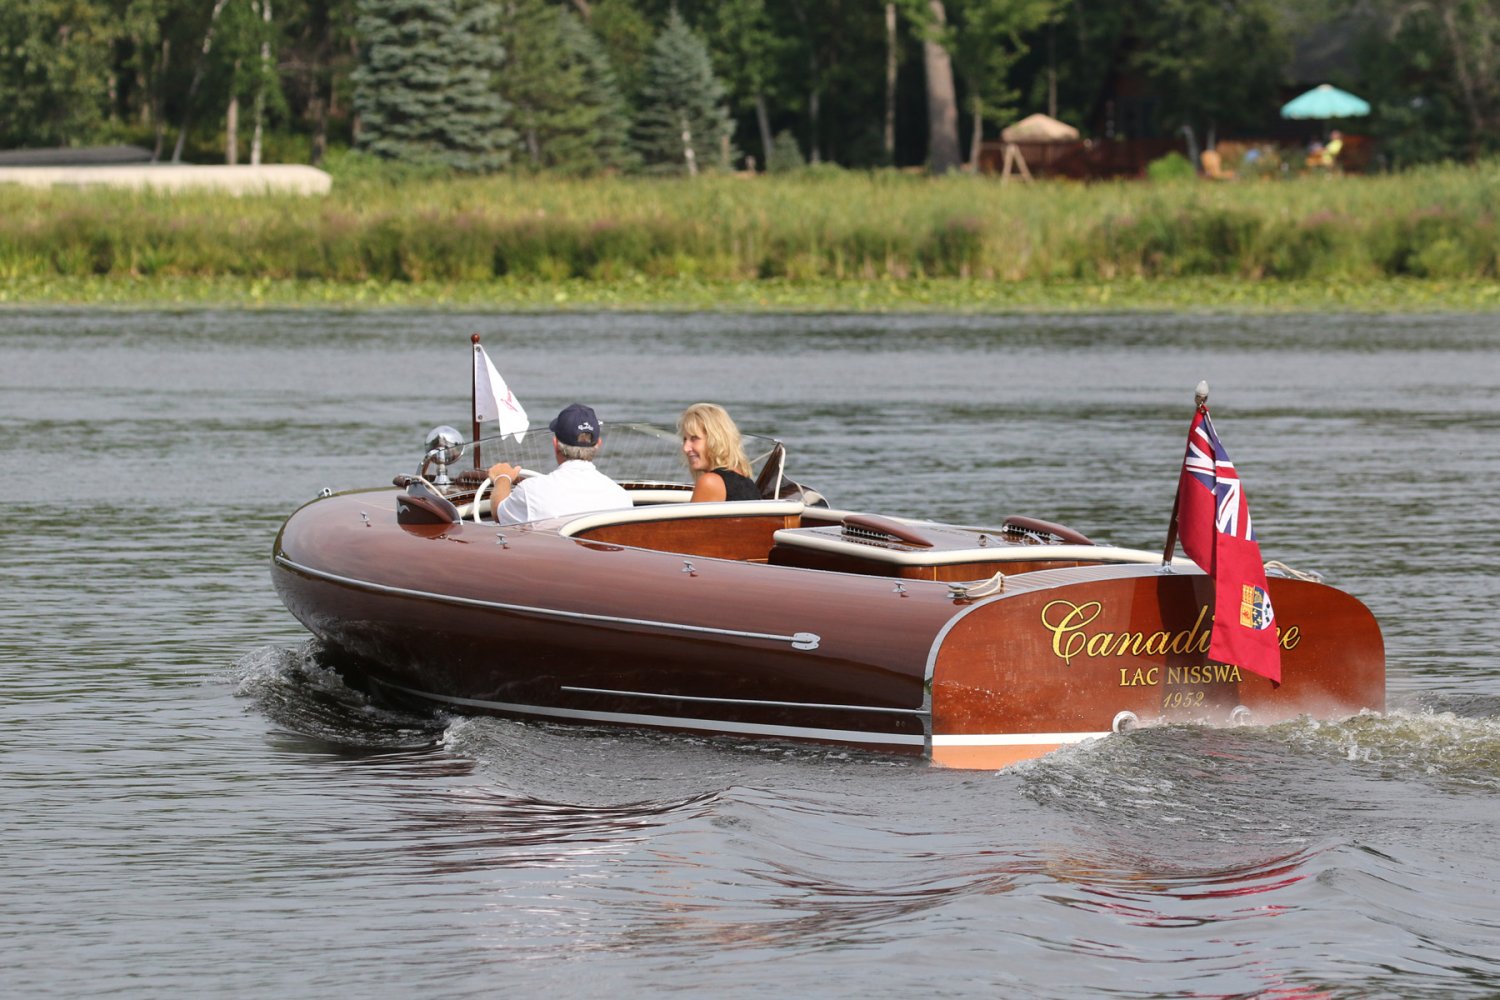 1952 Greavette 24′ Runabout “Canadienne” powered by a 225HP Grey Marine V-8..jpg